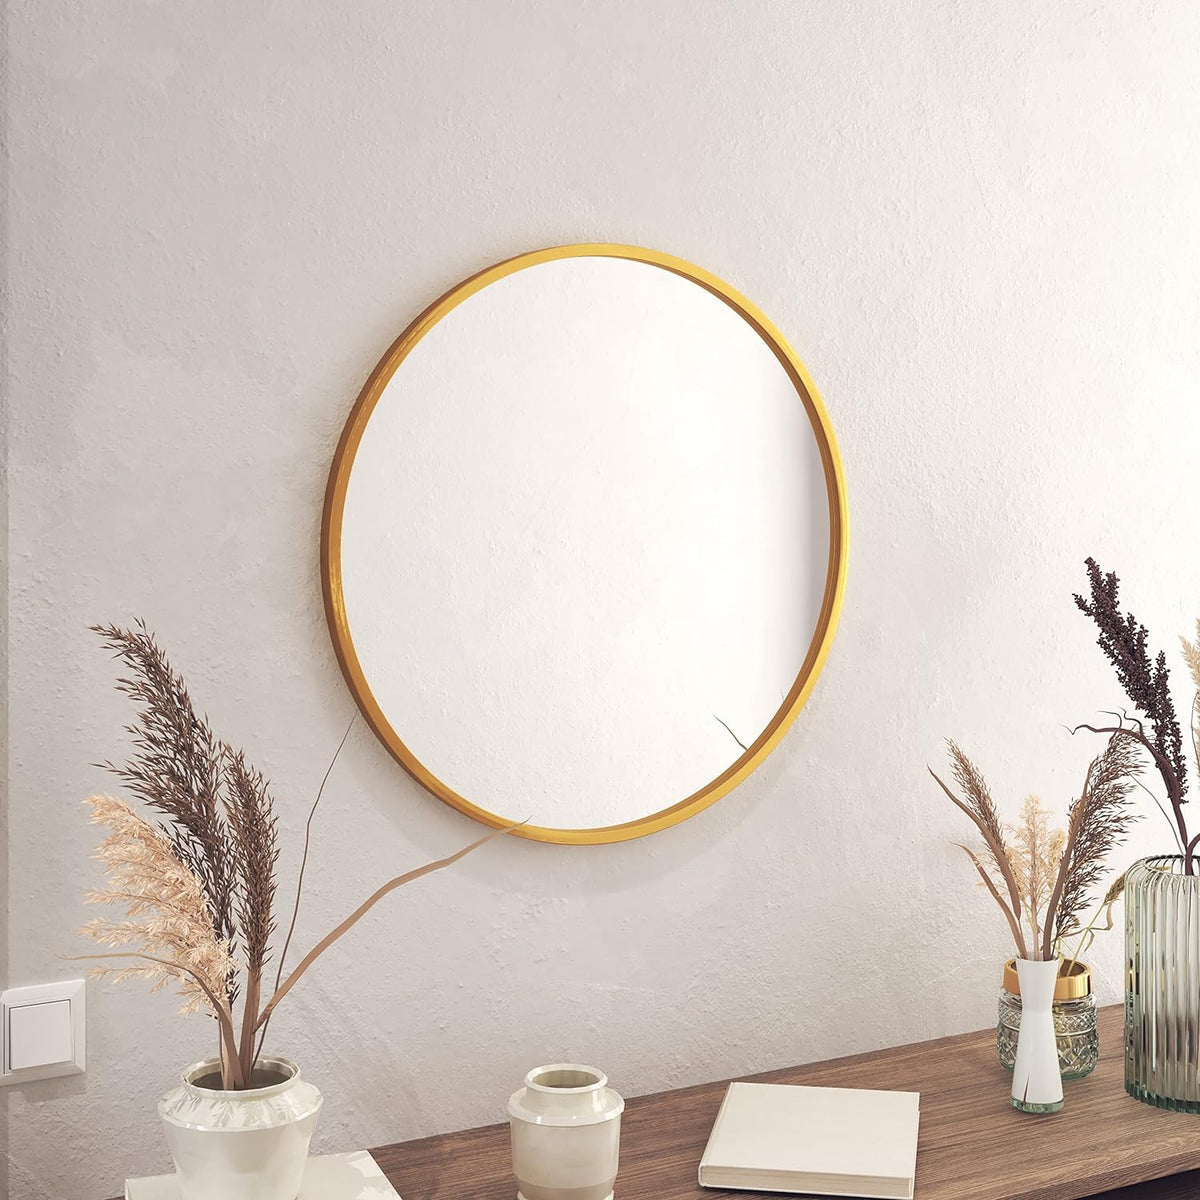 SmileSellers Metal Decorative HD Clear Mirror Wall Mount Round Wall Mirror 24"x24" for Bedroom, Home Decor, wash Basin, Vanity, Makeup, Bathroom